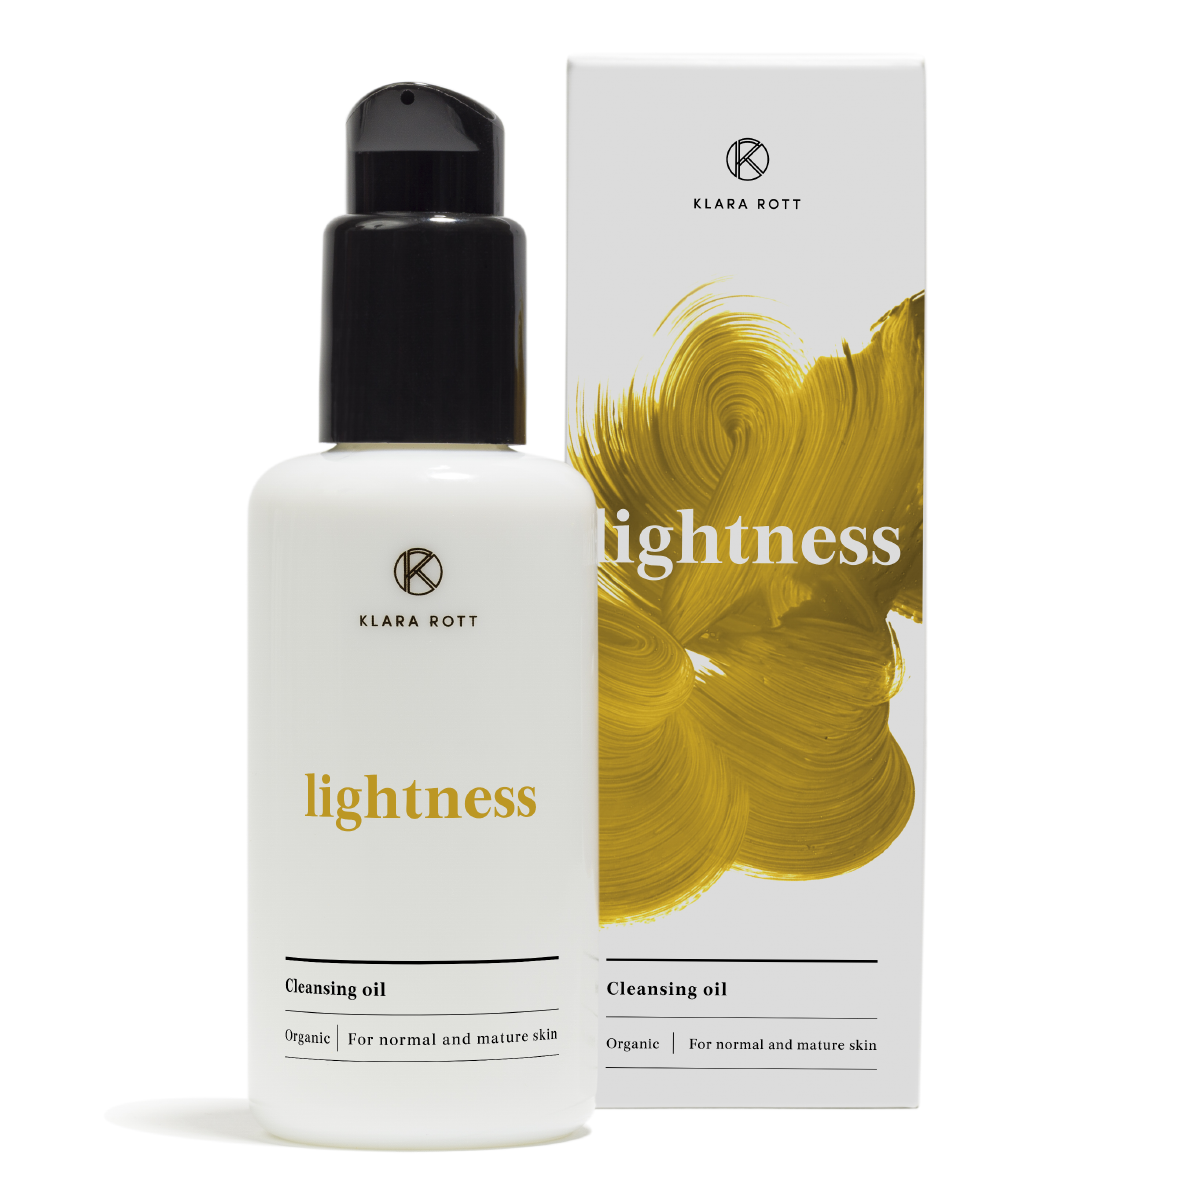 Lightness - Cleansing oil for normal and mature skin 